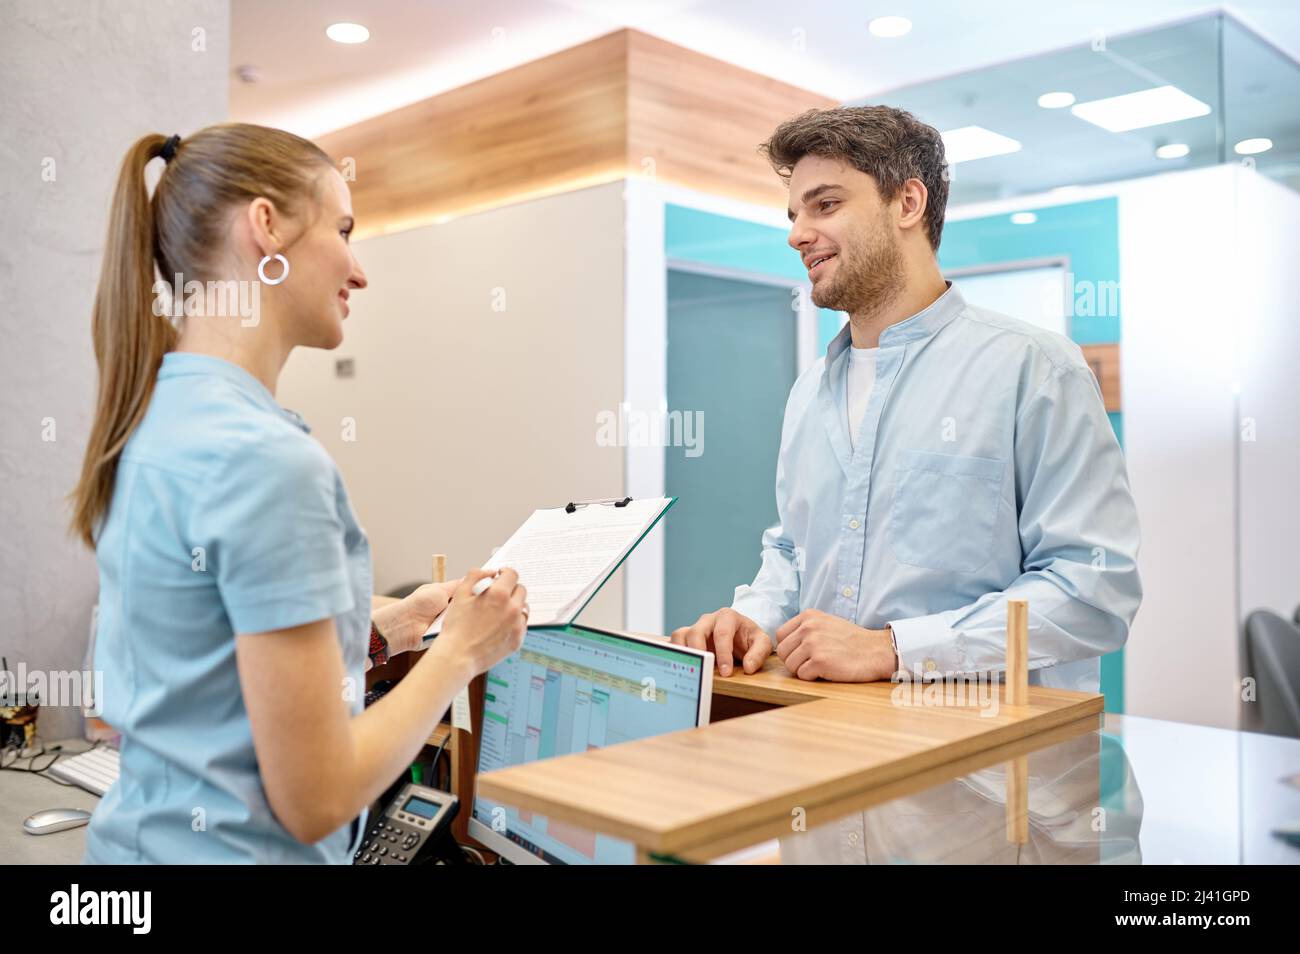 Man talking to professional receptionist in clinic Stock Photo